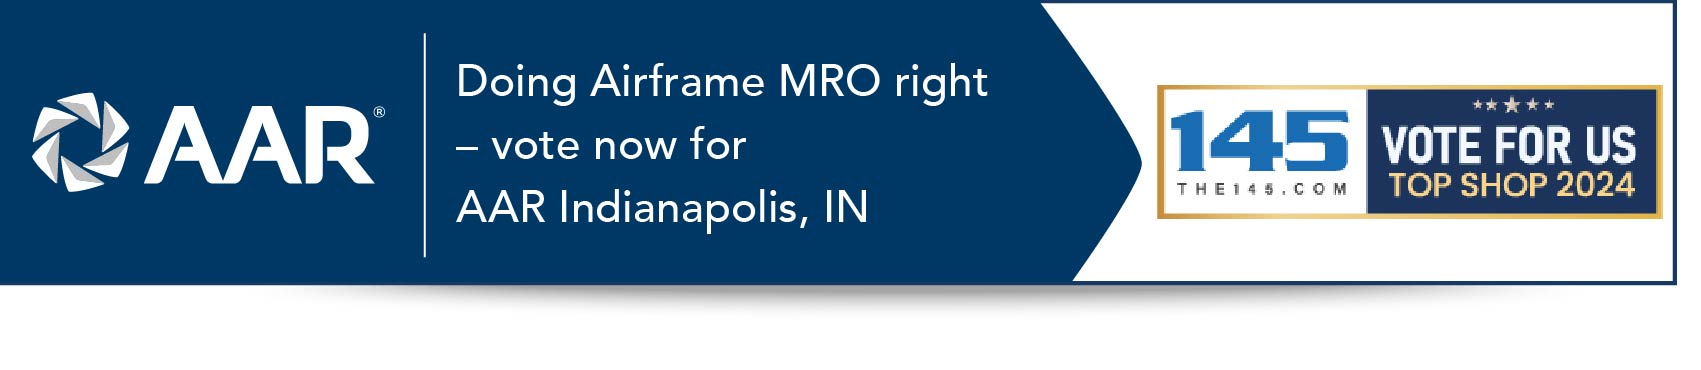 Vote for MRO Services - Indianapolis as Your Top Shop